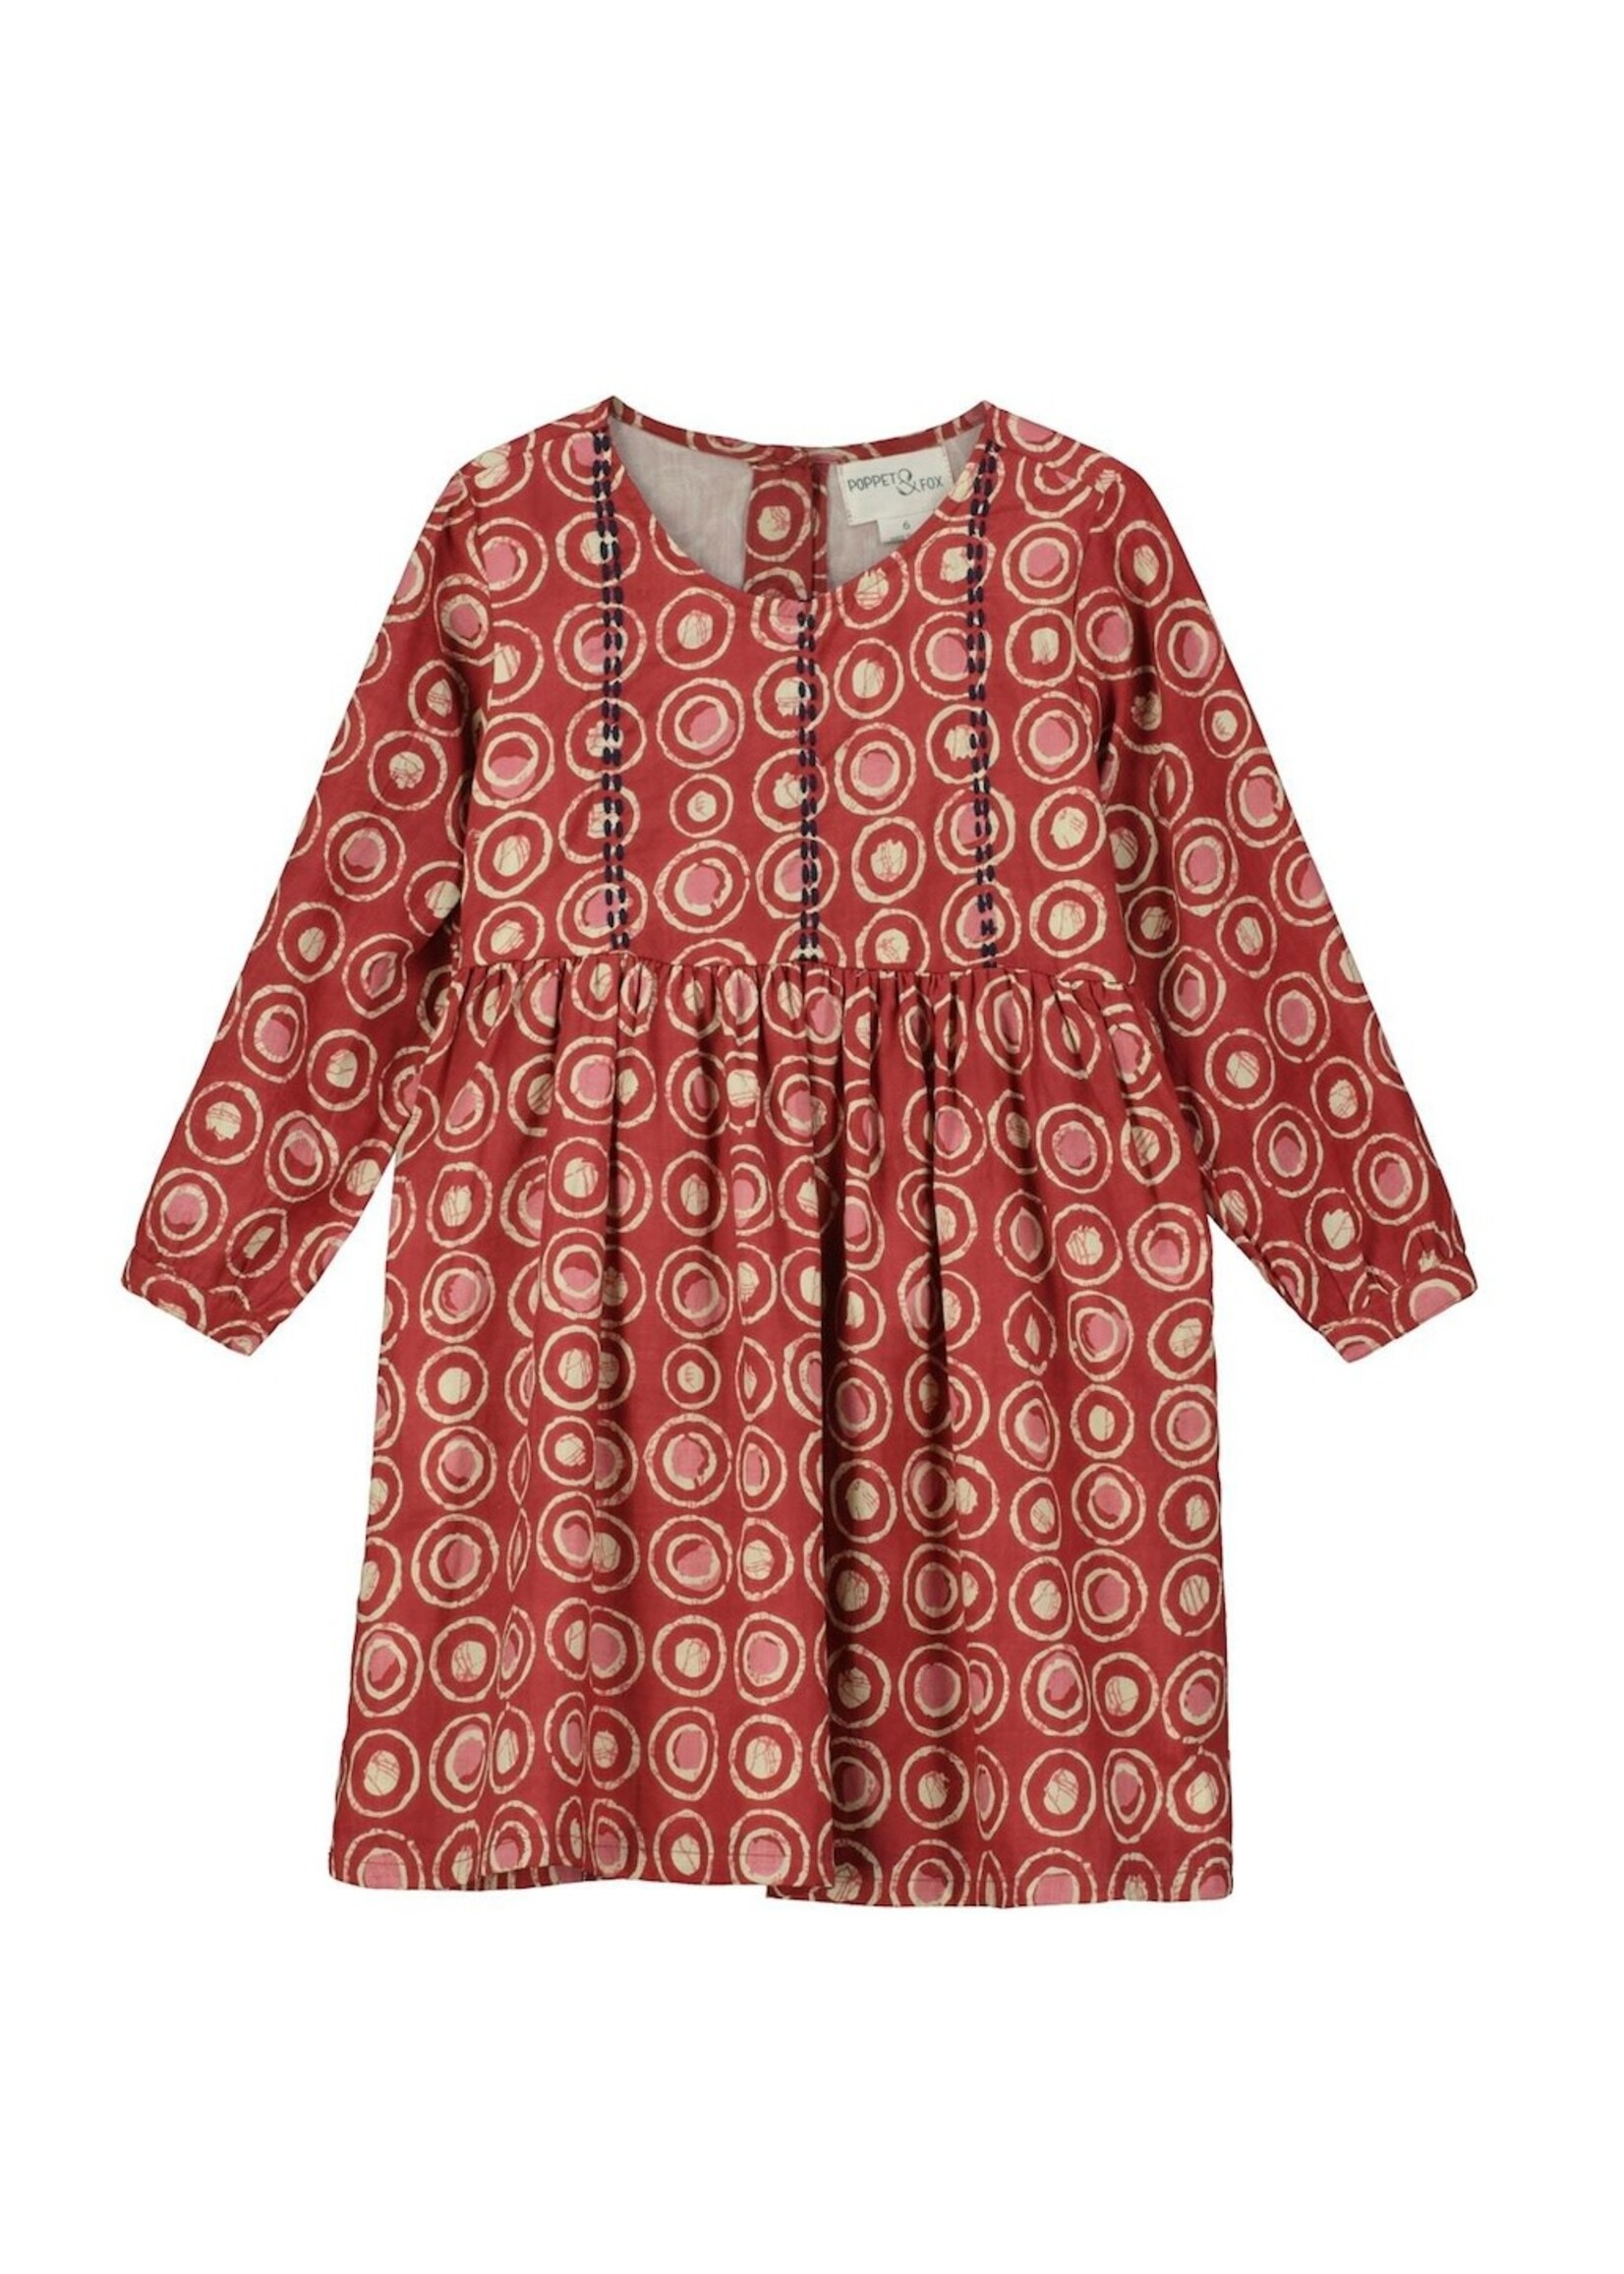 Poppet & Fox Poppet & Fox, Embroidered Day Dress || Red with Block Print Concentric Circles